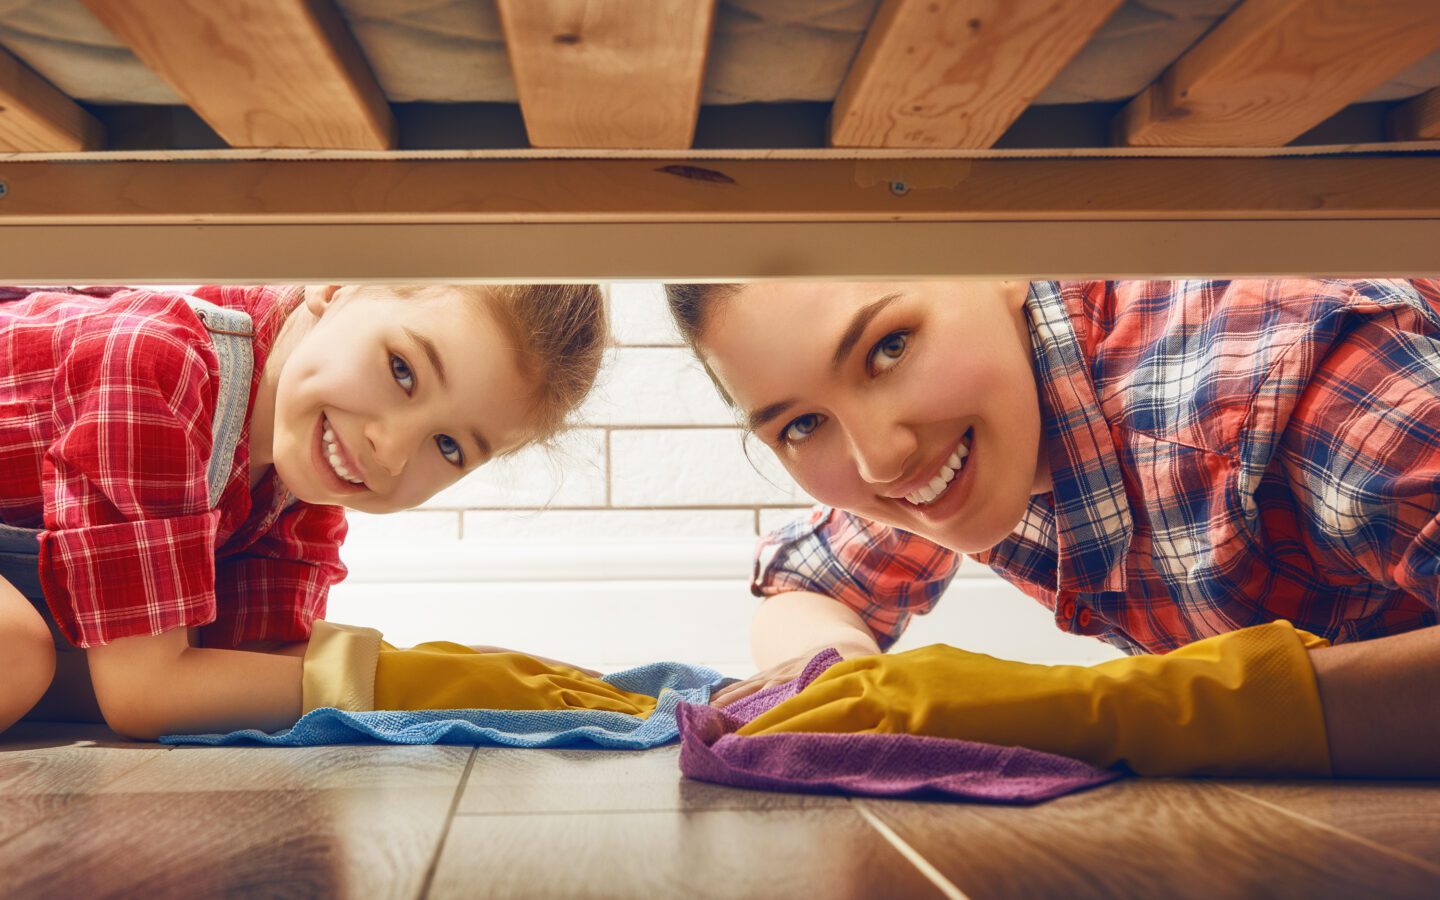 How to Get Kids to Like Doing Chores